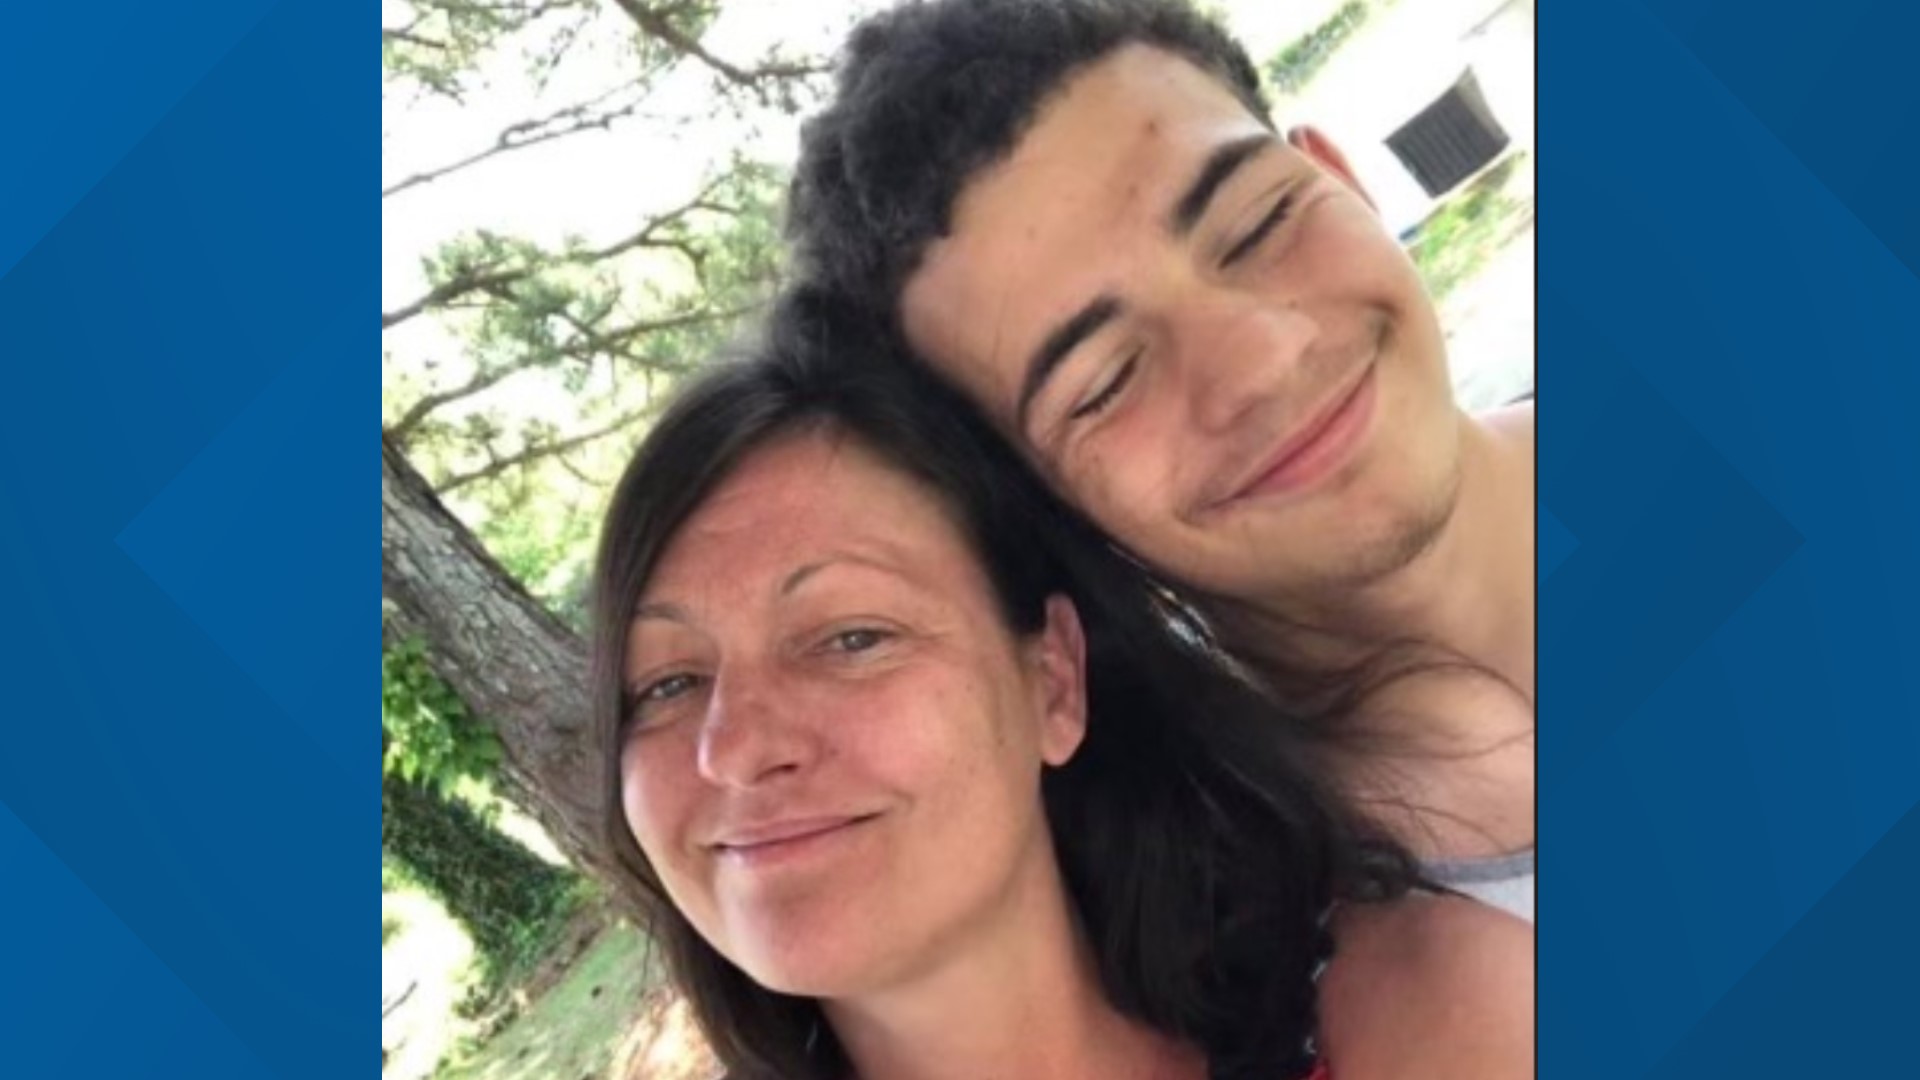 Family members said the two teens killed in a neighborhood park in Gwinnett County overnight were close friends. The pain has left them heartbroken.